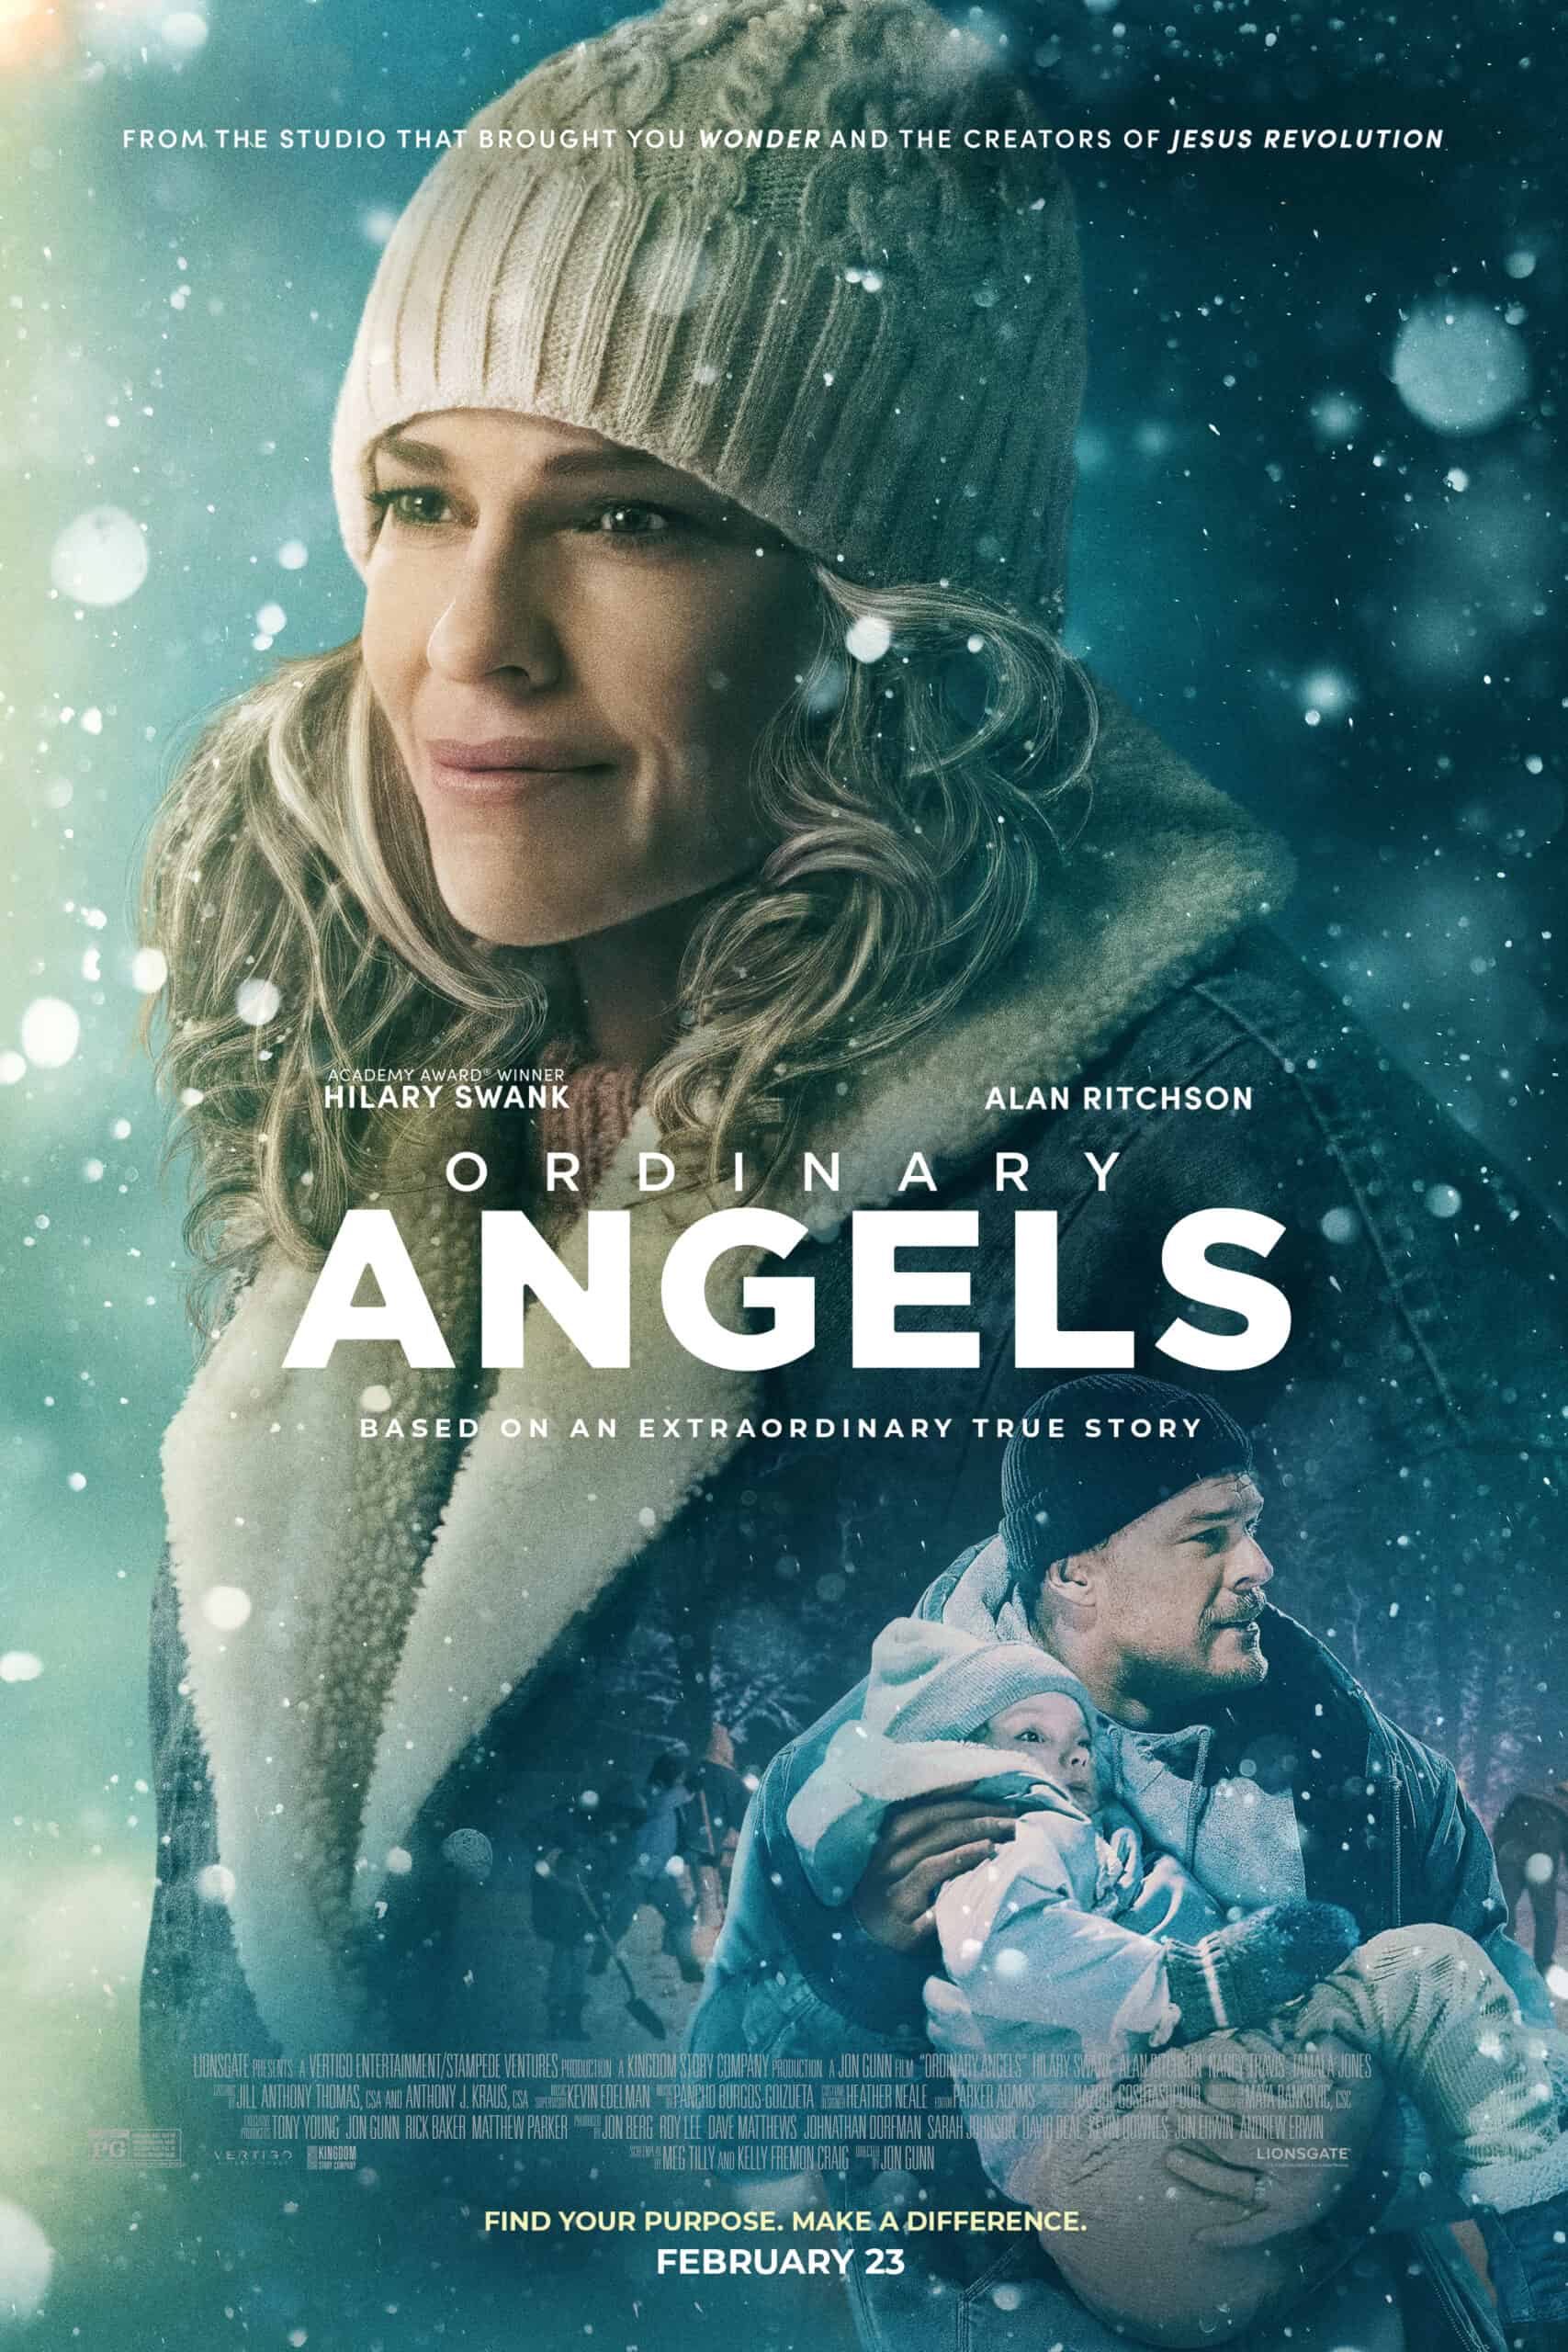 "Movie Poster," Ordinary Angels